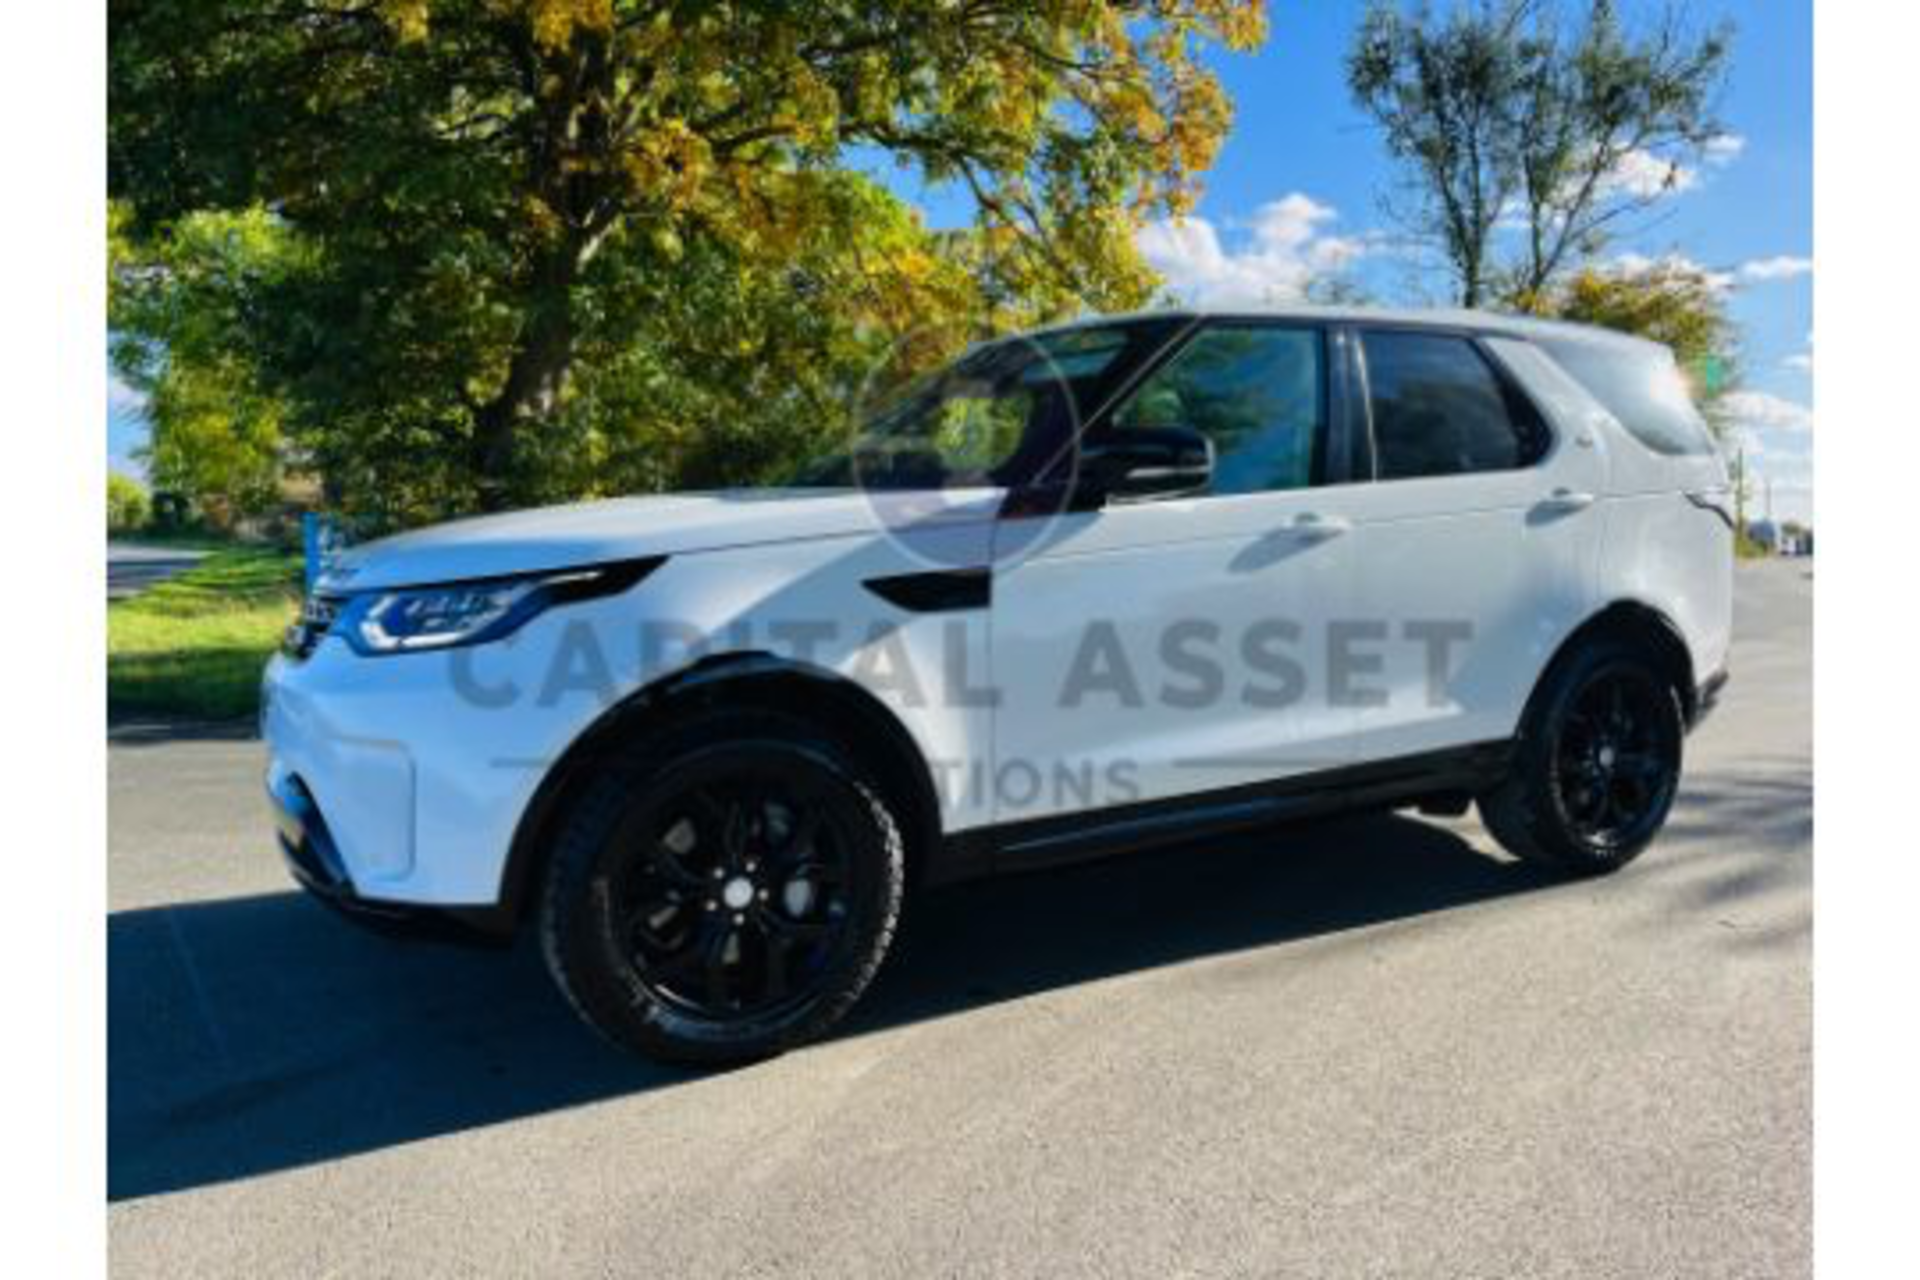 (ON SALE) LAND ROVER DISCOVERY 5 "SDV6 3.0" 'AUTO' 20 REG -1 OWNER -LEATHER- SAT NAV - NO VAT